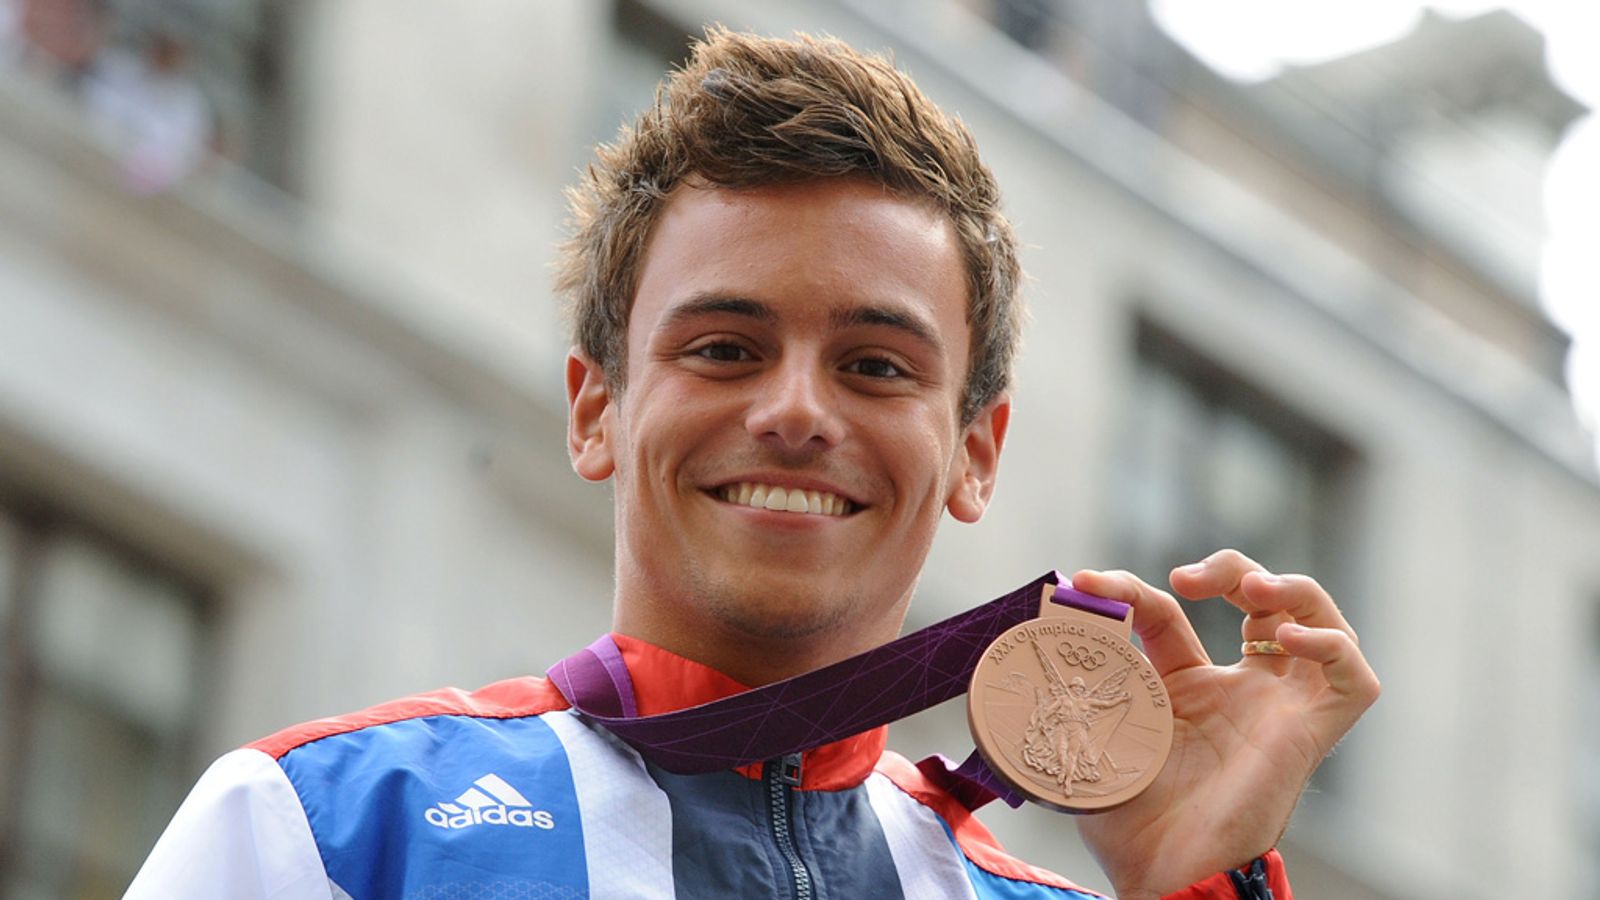 Tom Daley's coach gives warning over criticism diver receives.